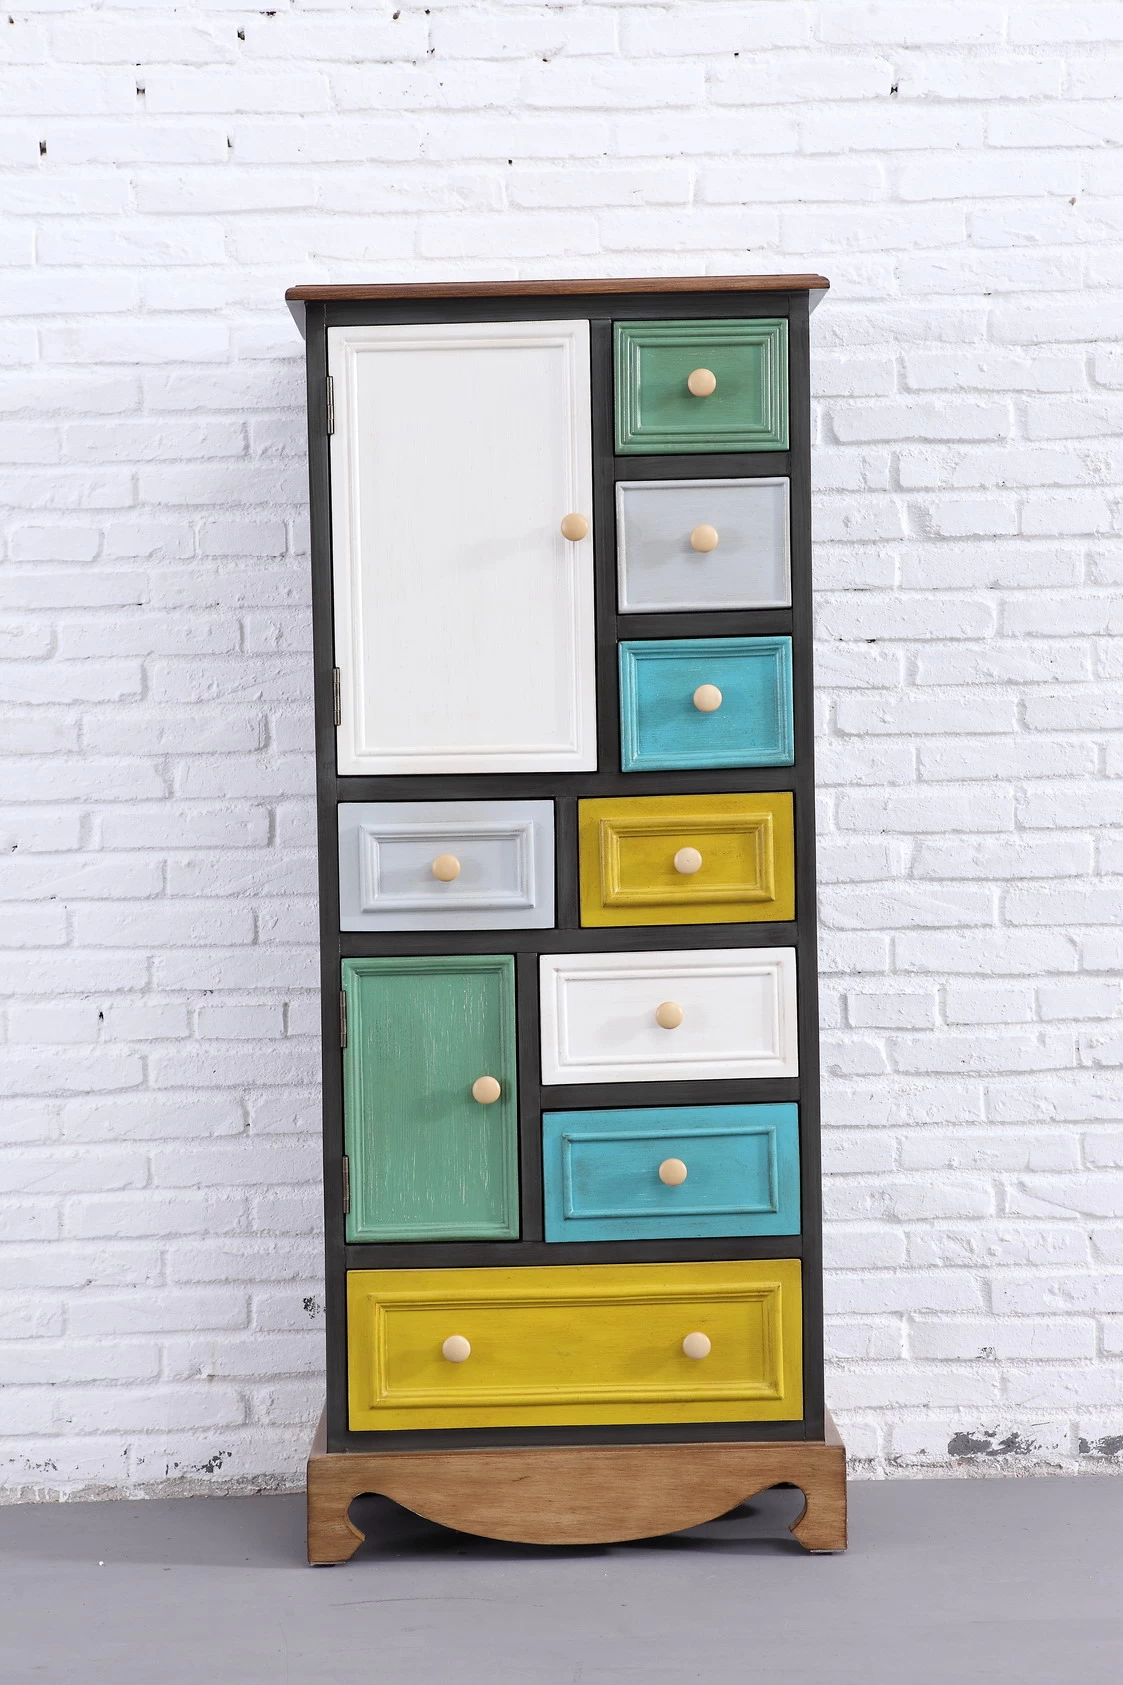 European retro colorful cupboard  organizer luxury and fashion storage cabinet  8 drawers and 2 doors